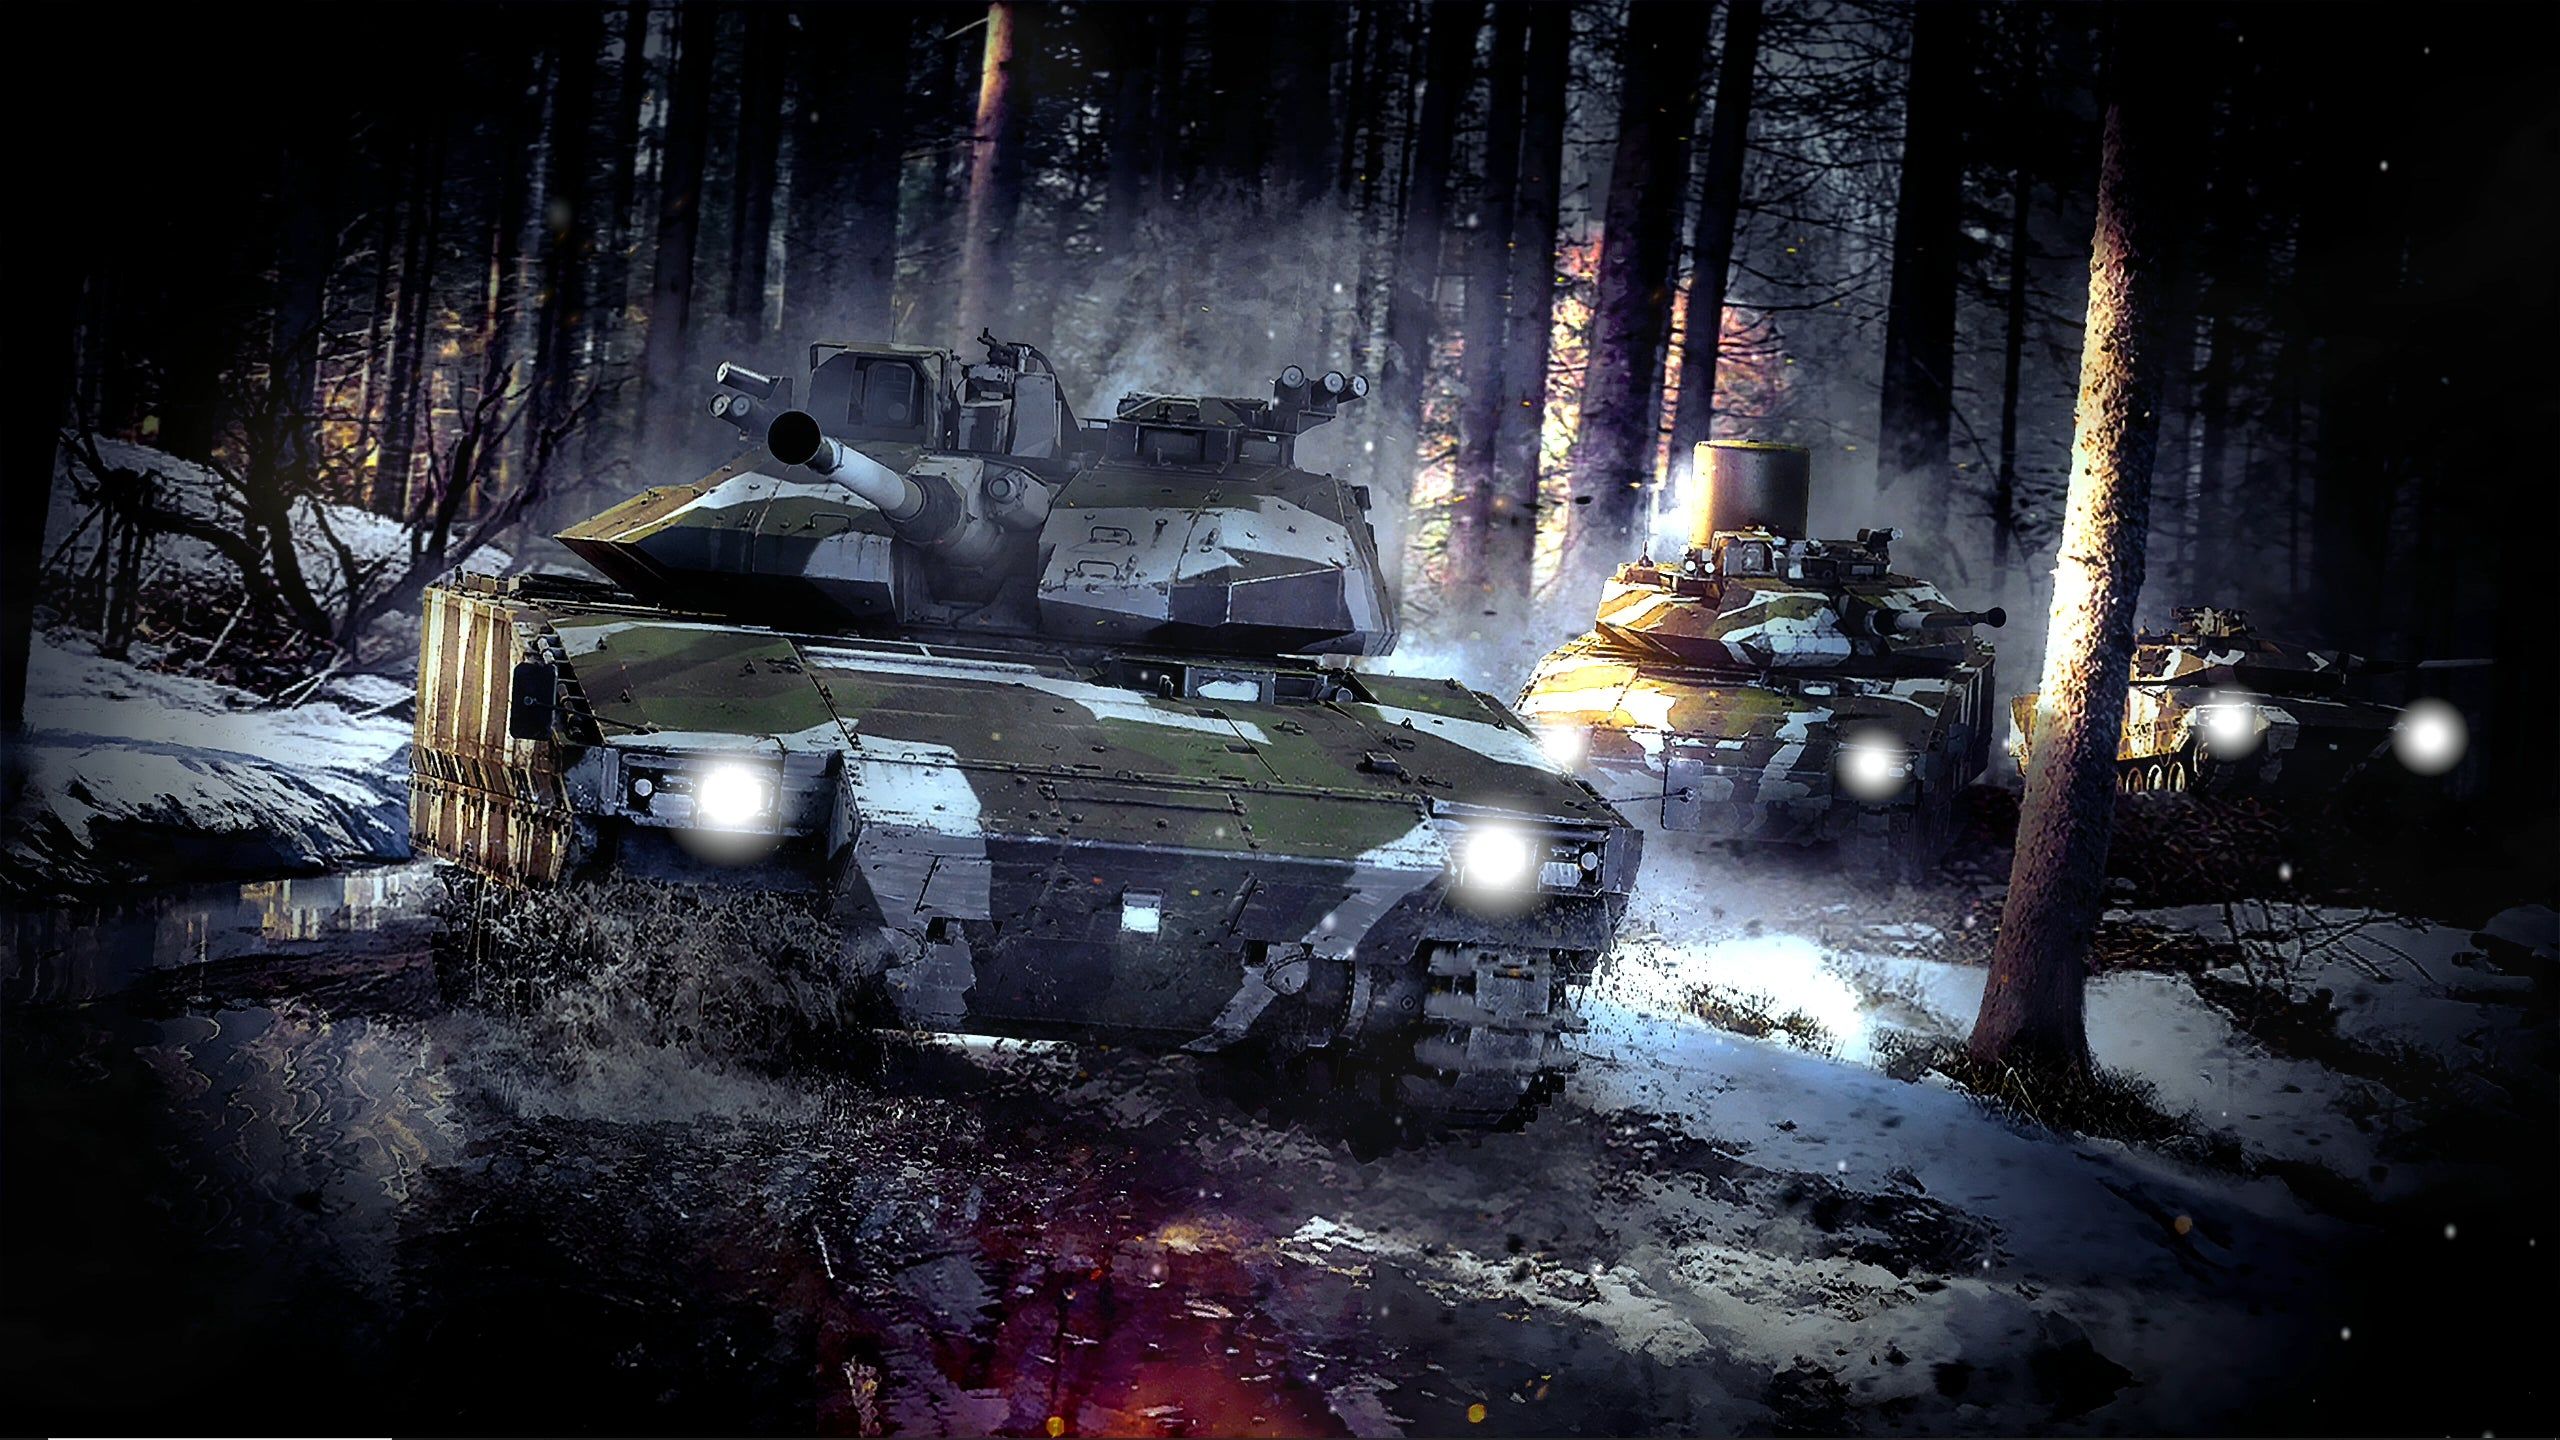 This is got to be my favorite wallpaper so far from War Thunder